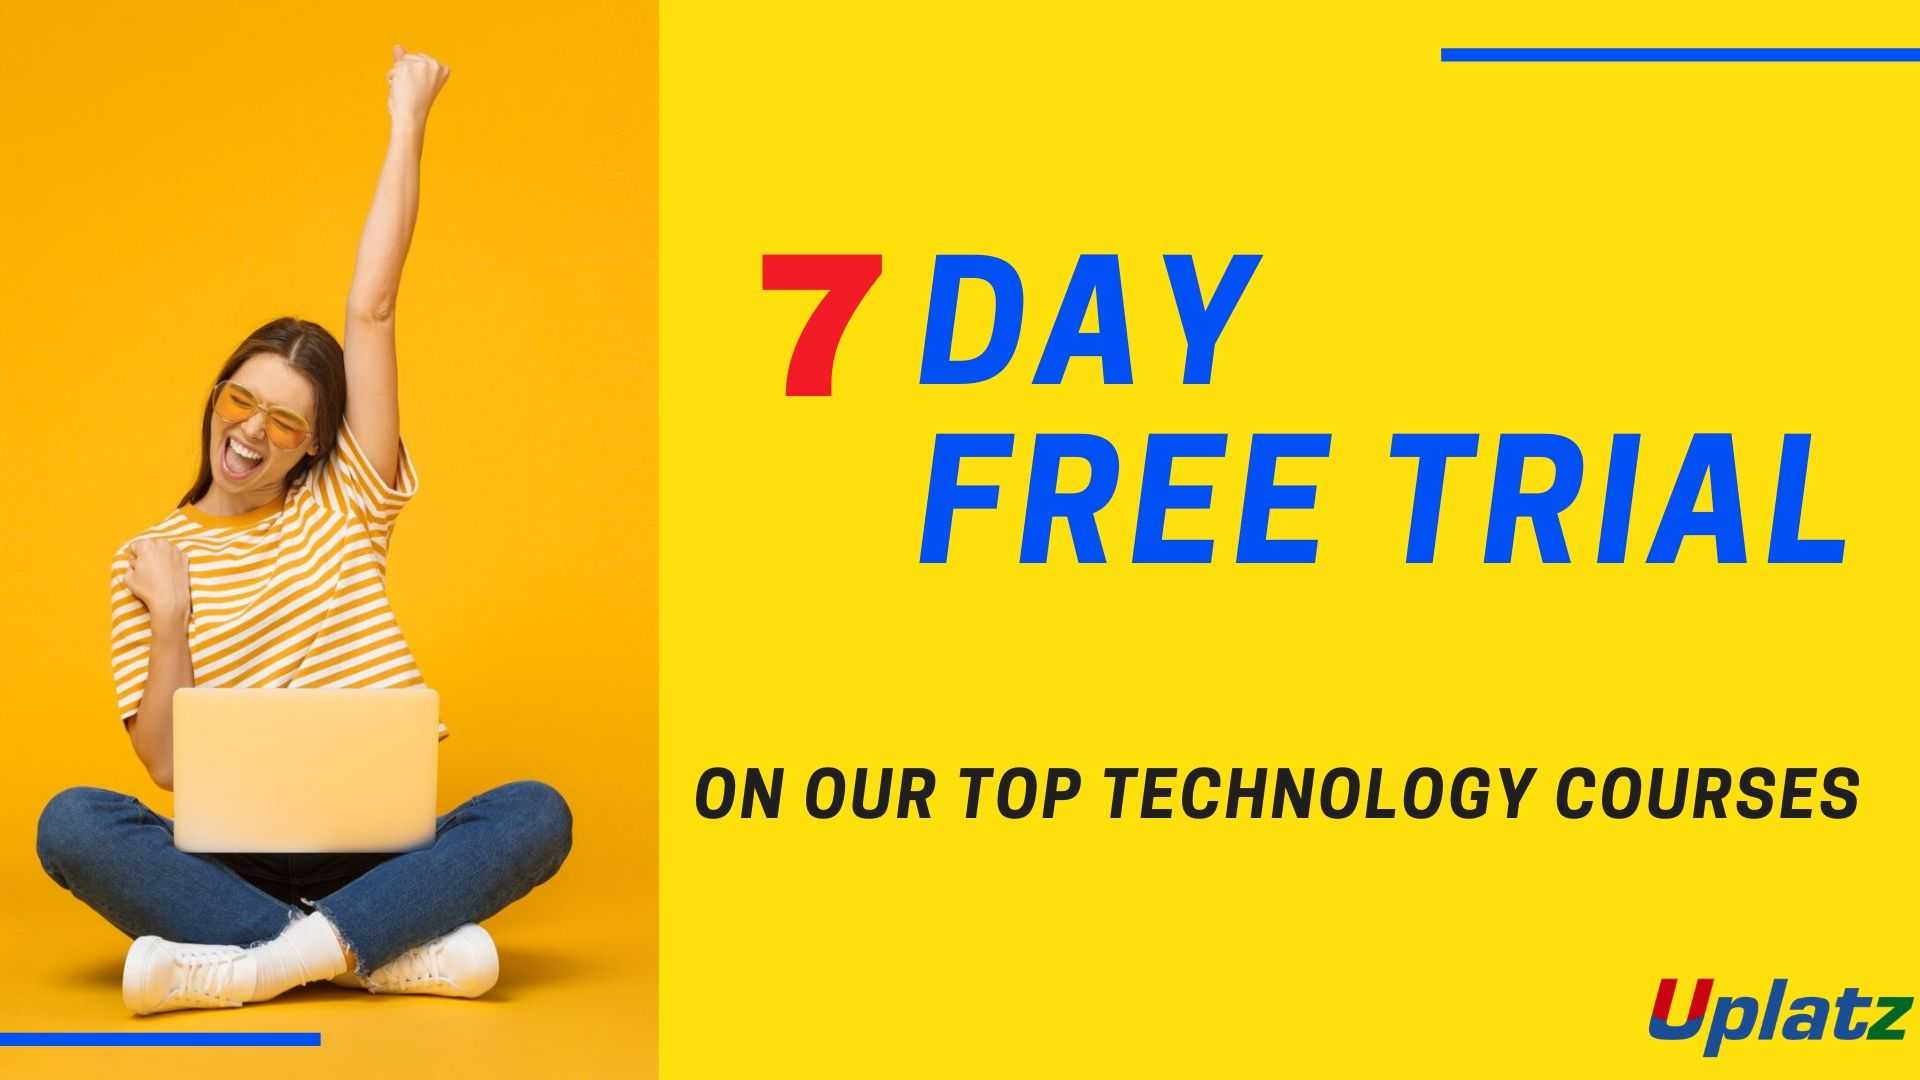 FREE 7 day trial on IT Courses  course and certification